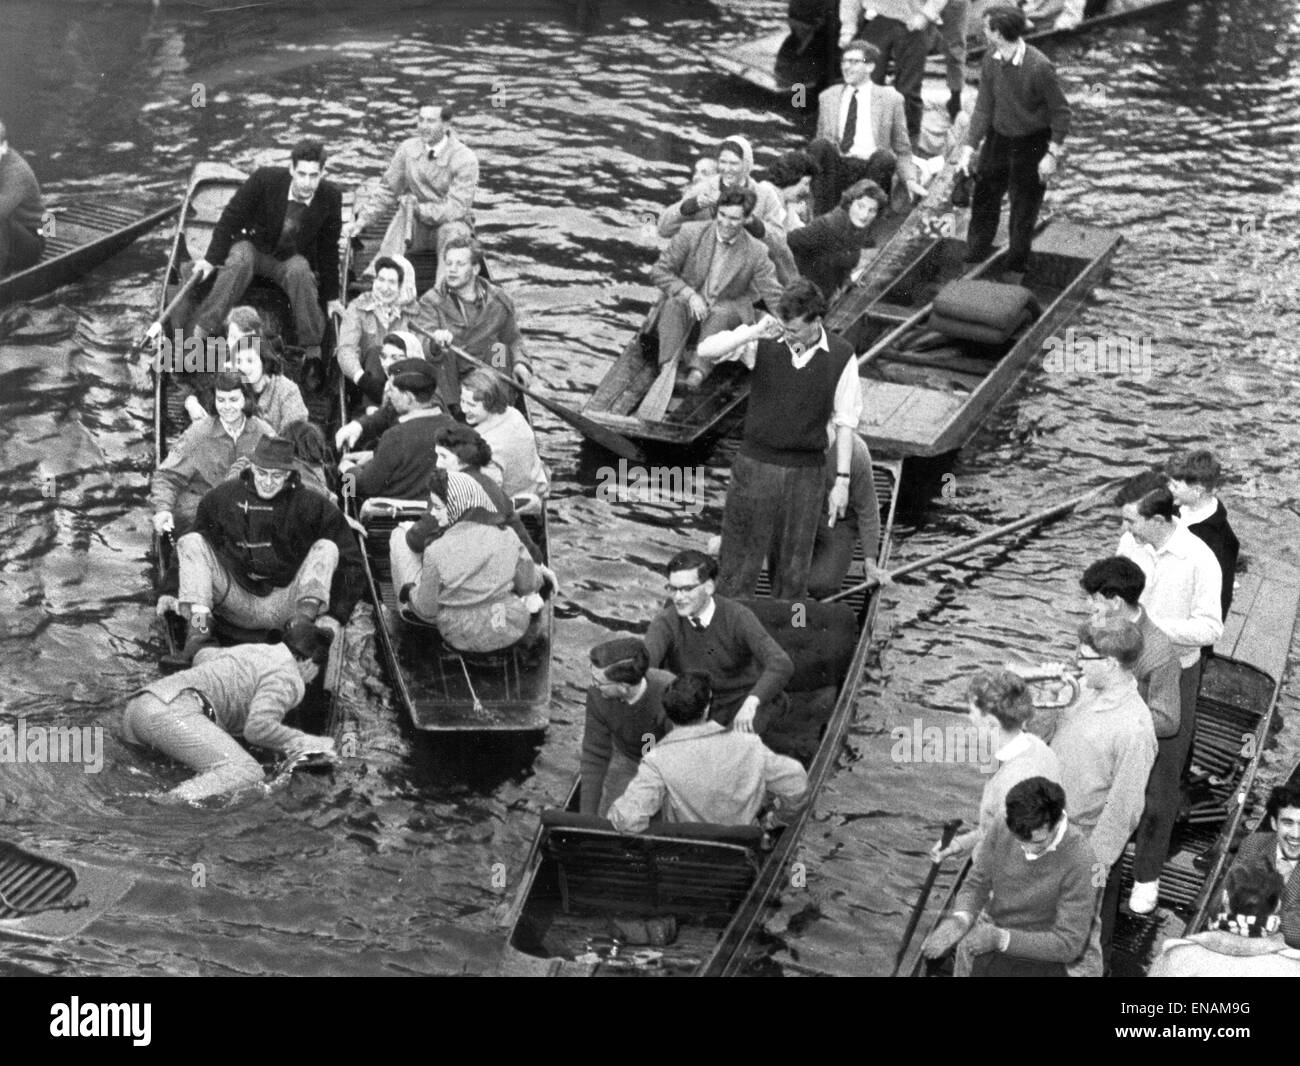 FILE PHOTOS: Oxford, Oxfordshire, UK. 1st May, 1959. Oxford May Day 01.05.1959. Revellers out in punts, on the River Cherwell by Magdalen Bridge, Oxford, enjoying May Morning. Oxford Mail/Alamy Features . Stock Photo